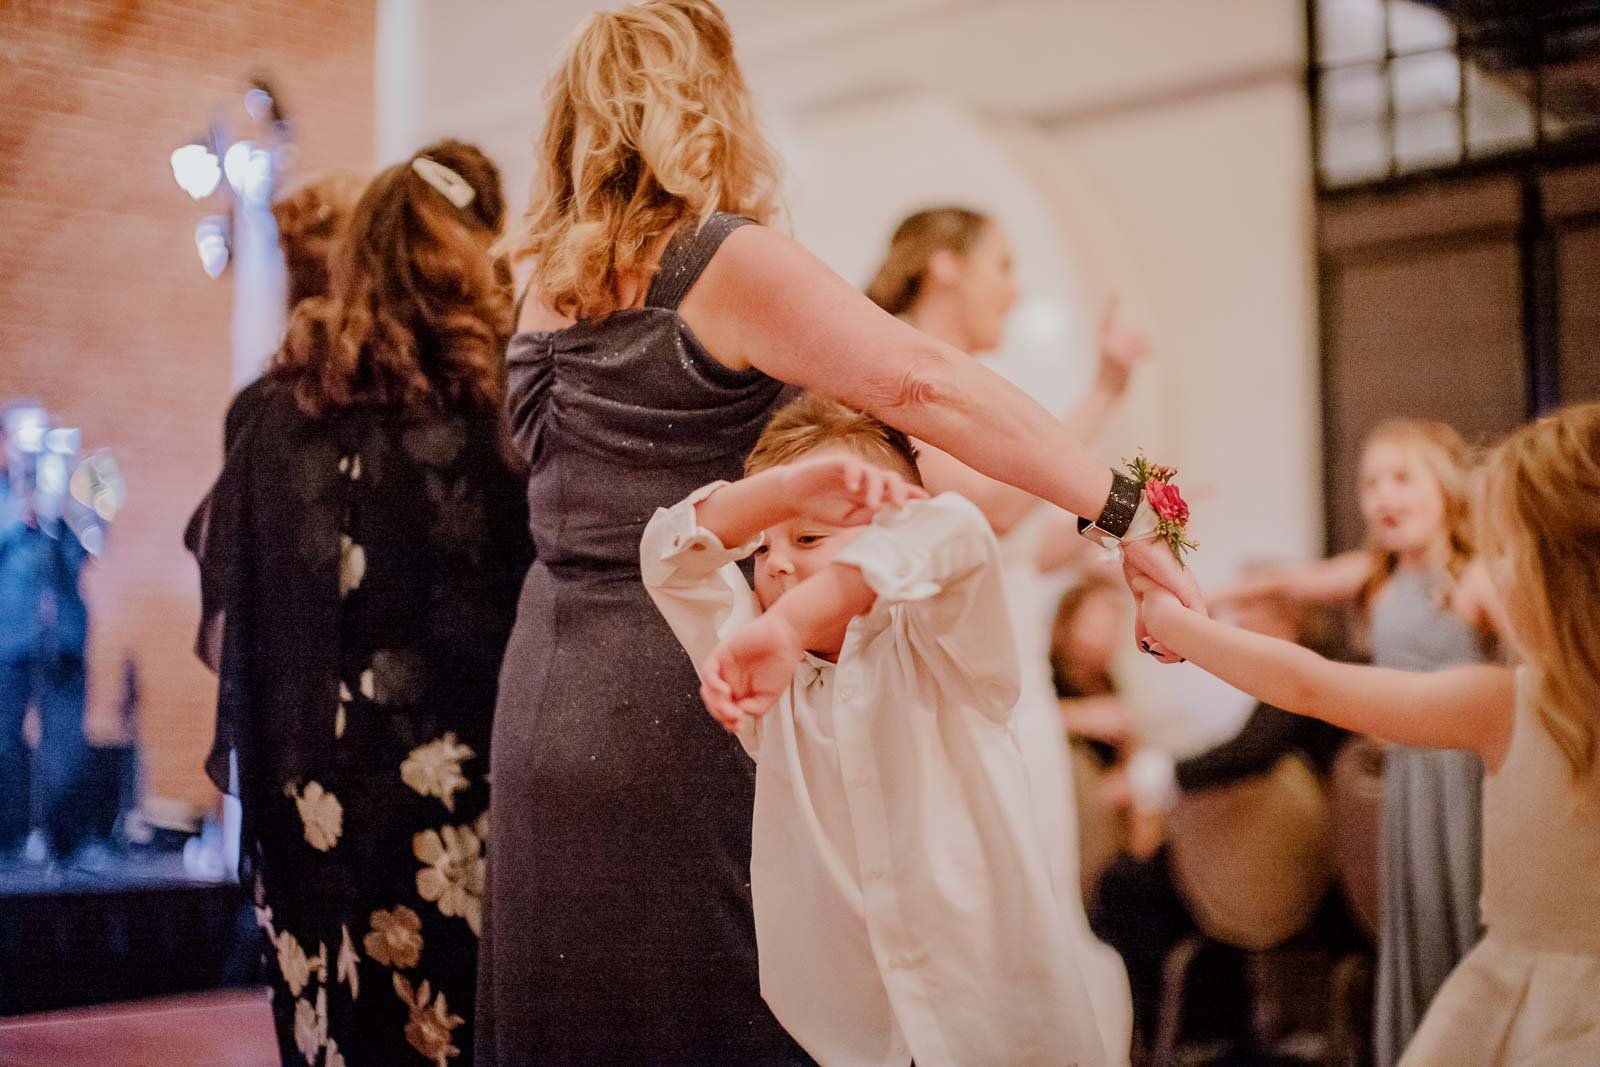 The ring bearer pushes his way through the crowd at a reception